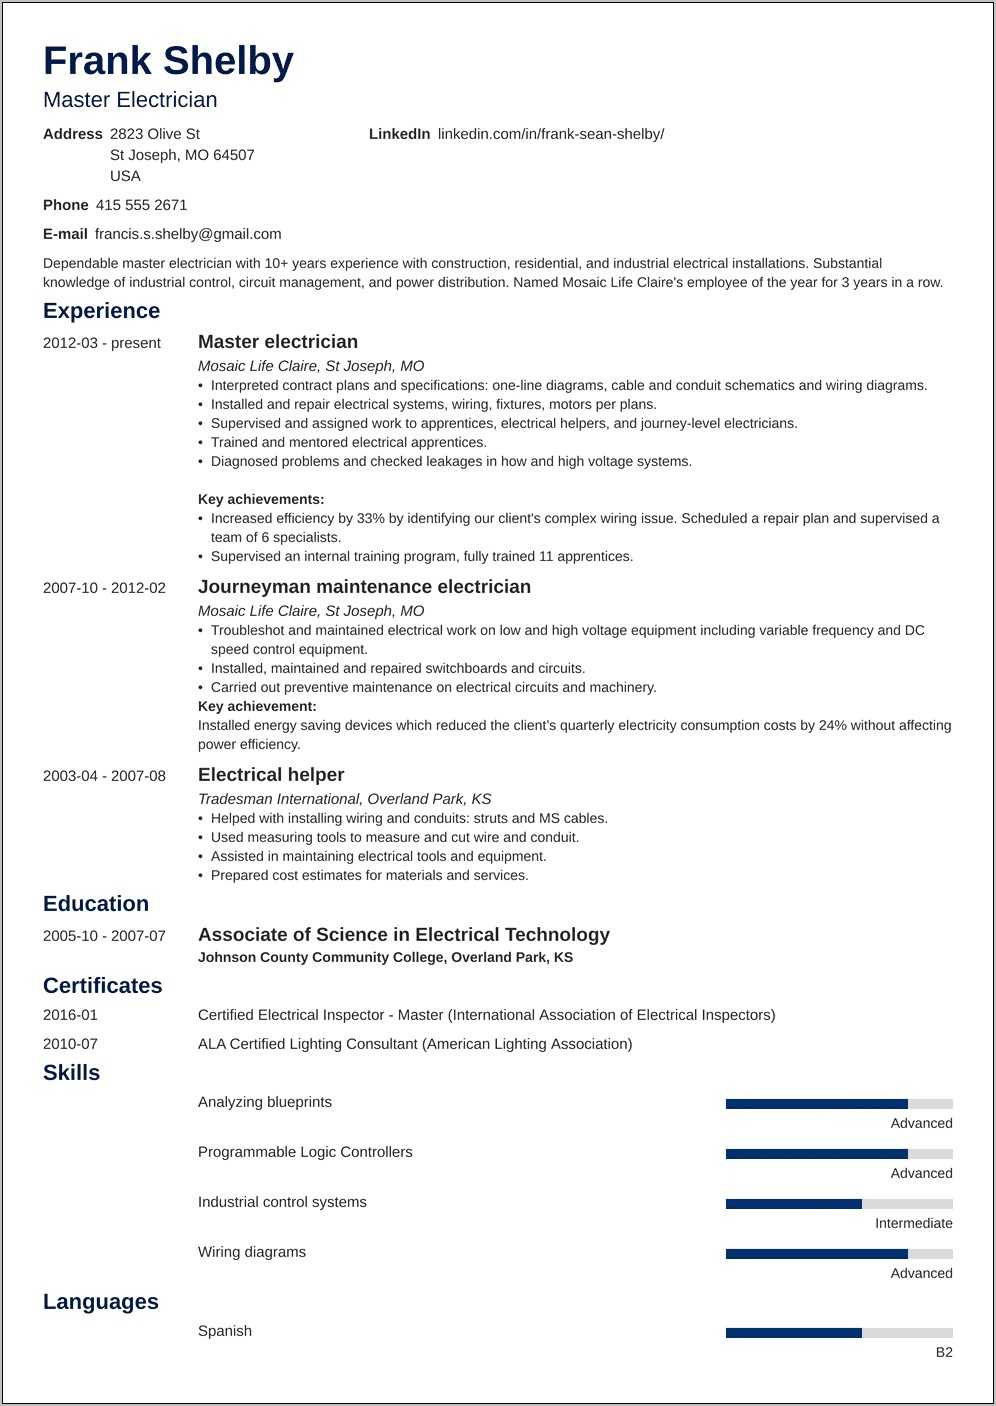 Resume Skills For Wiring Automotive Parts - Resume Example Gallery